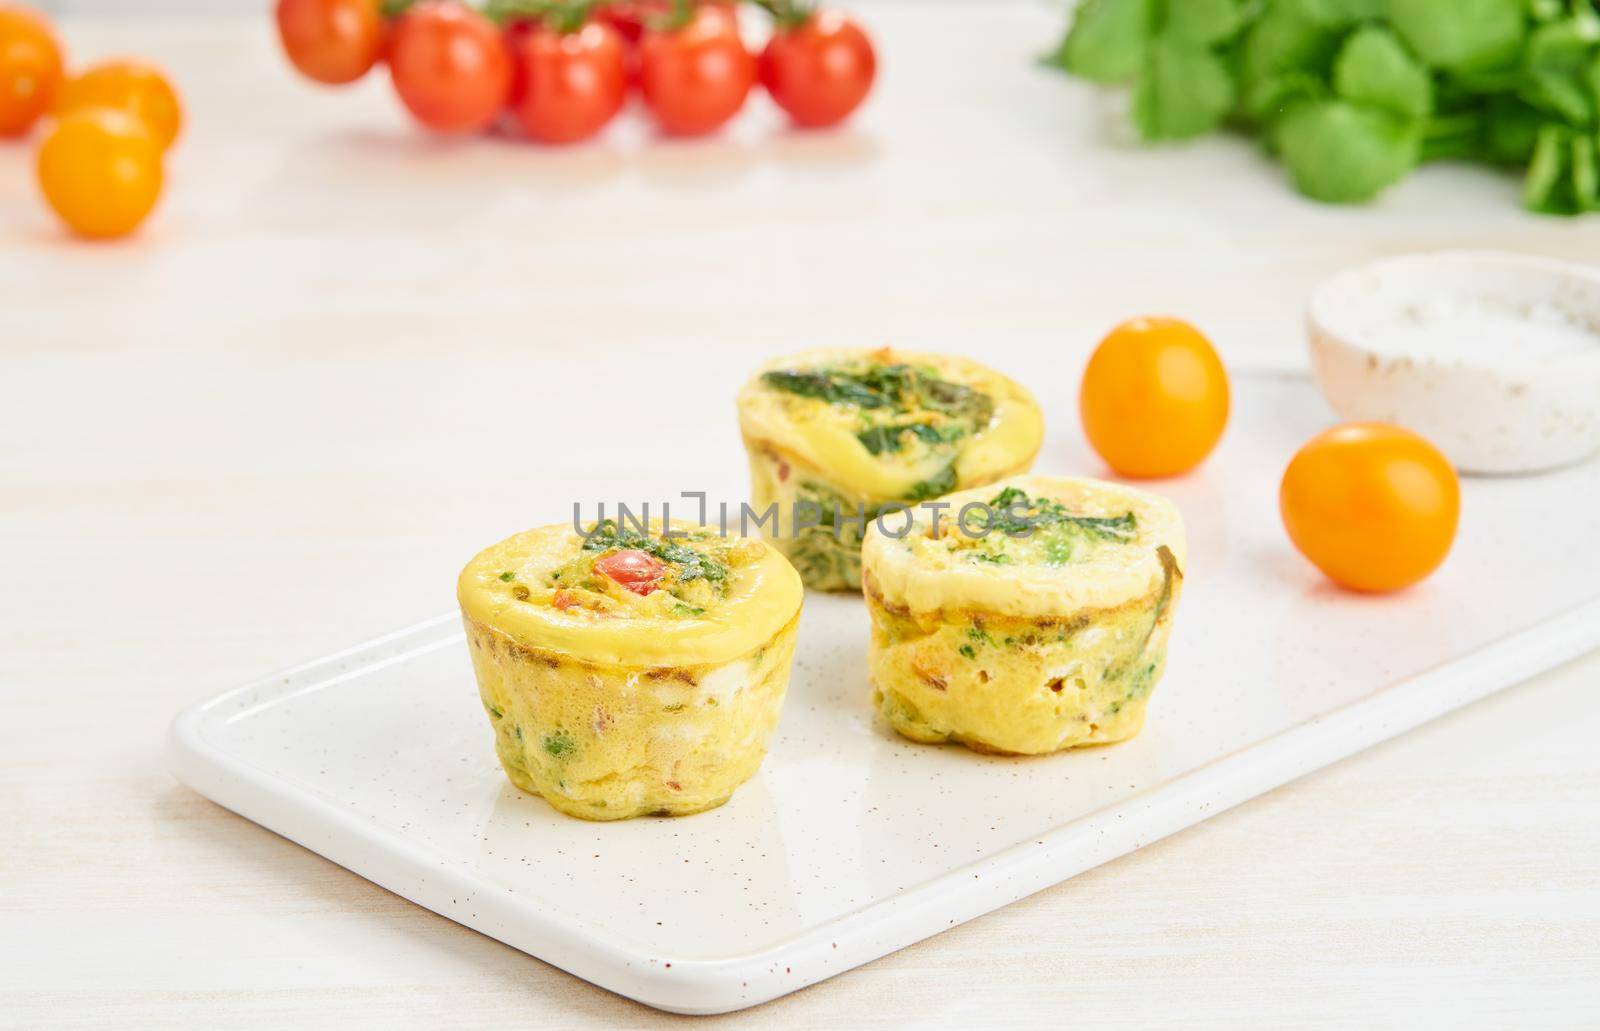 Egg muffins, paleo, keto diet. Omelet with spinach, vegetables, tomatoes baked in small molds